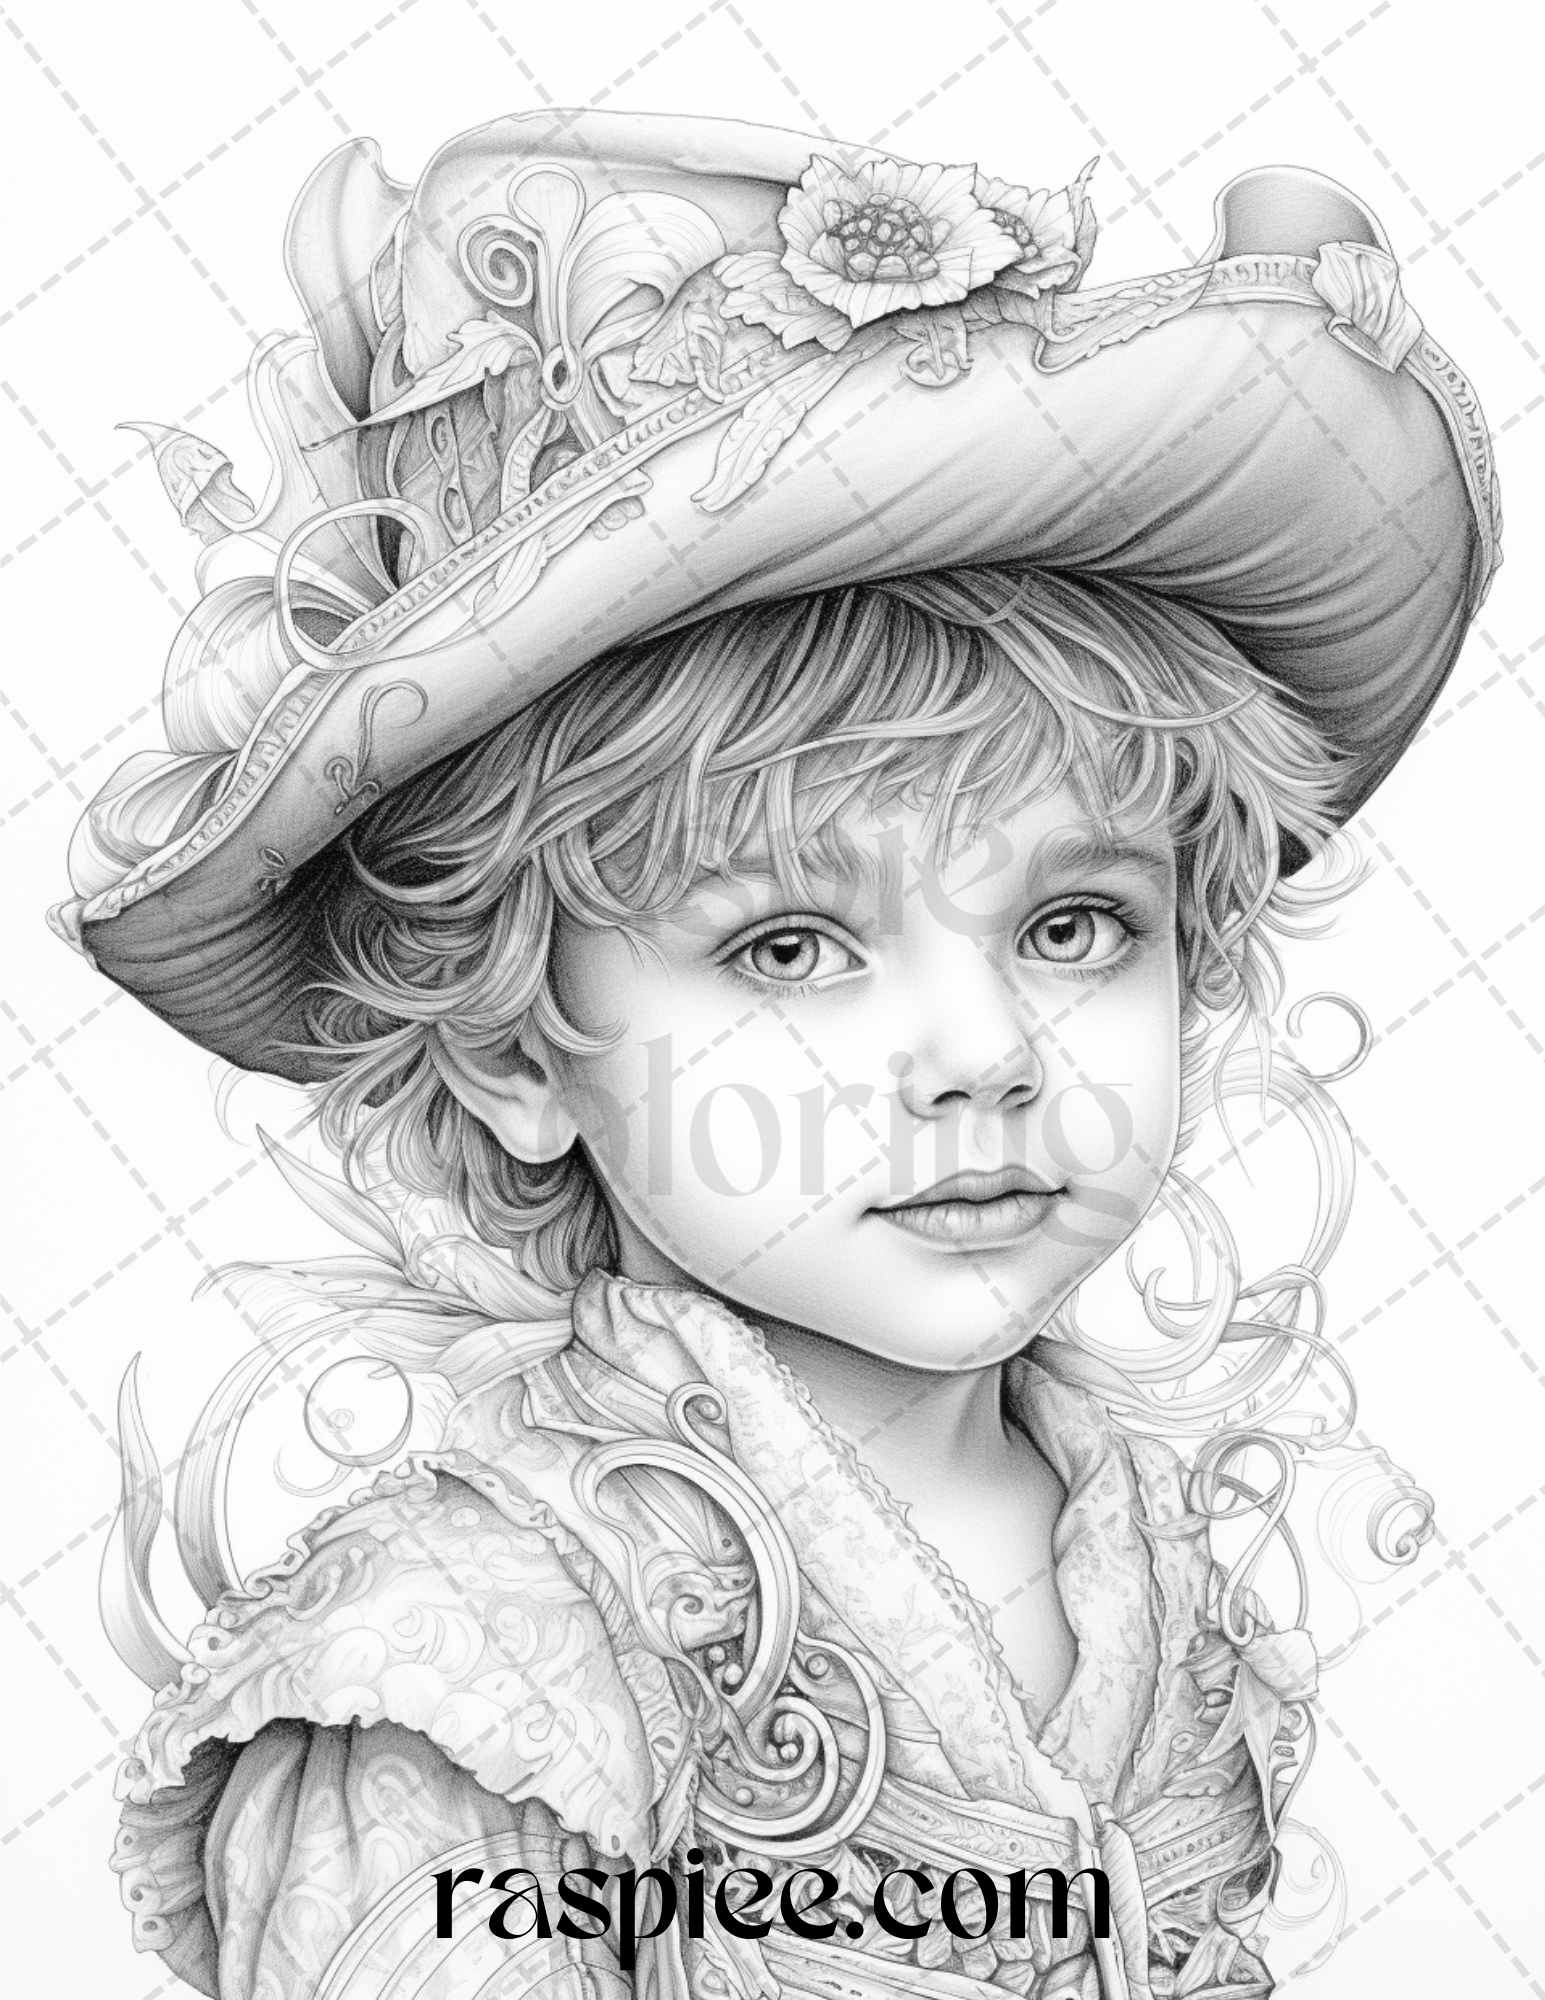 Adorable Pirates Grayscale Coloring Pages, Printable Coloring Pages for Adults, Pirate Theme Coloring Pages for Adults, Portrait Coloring Pages for Adults